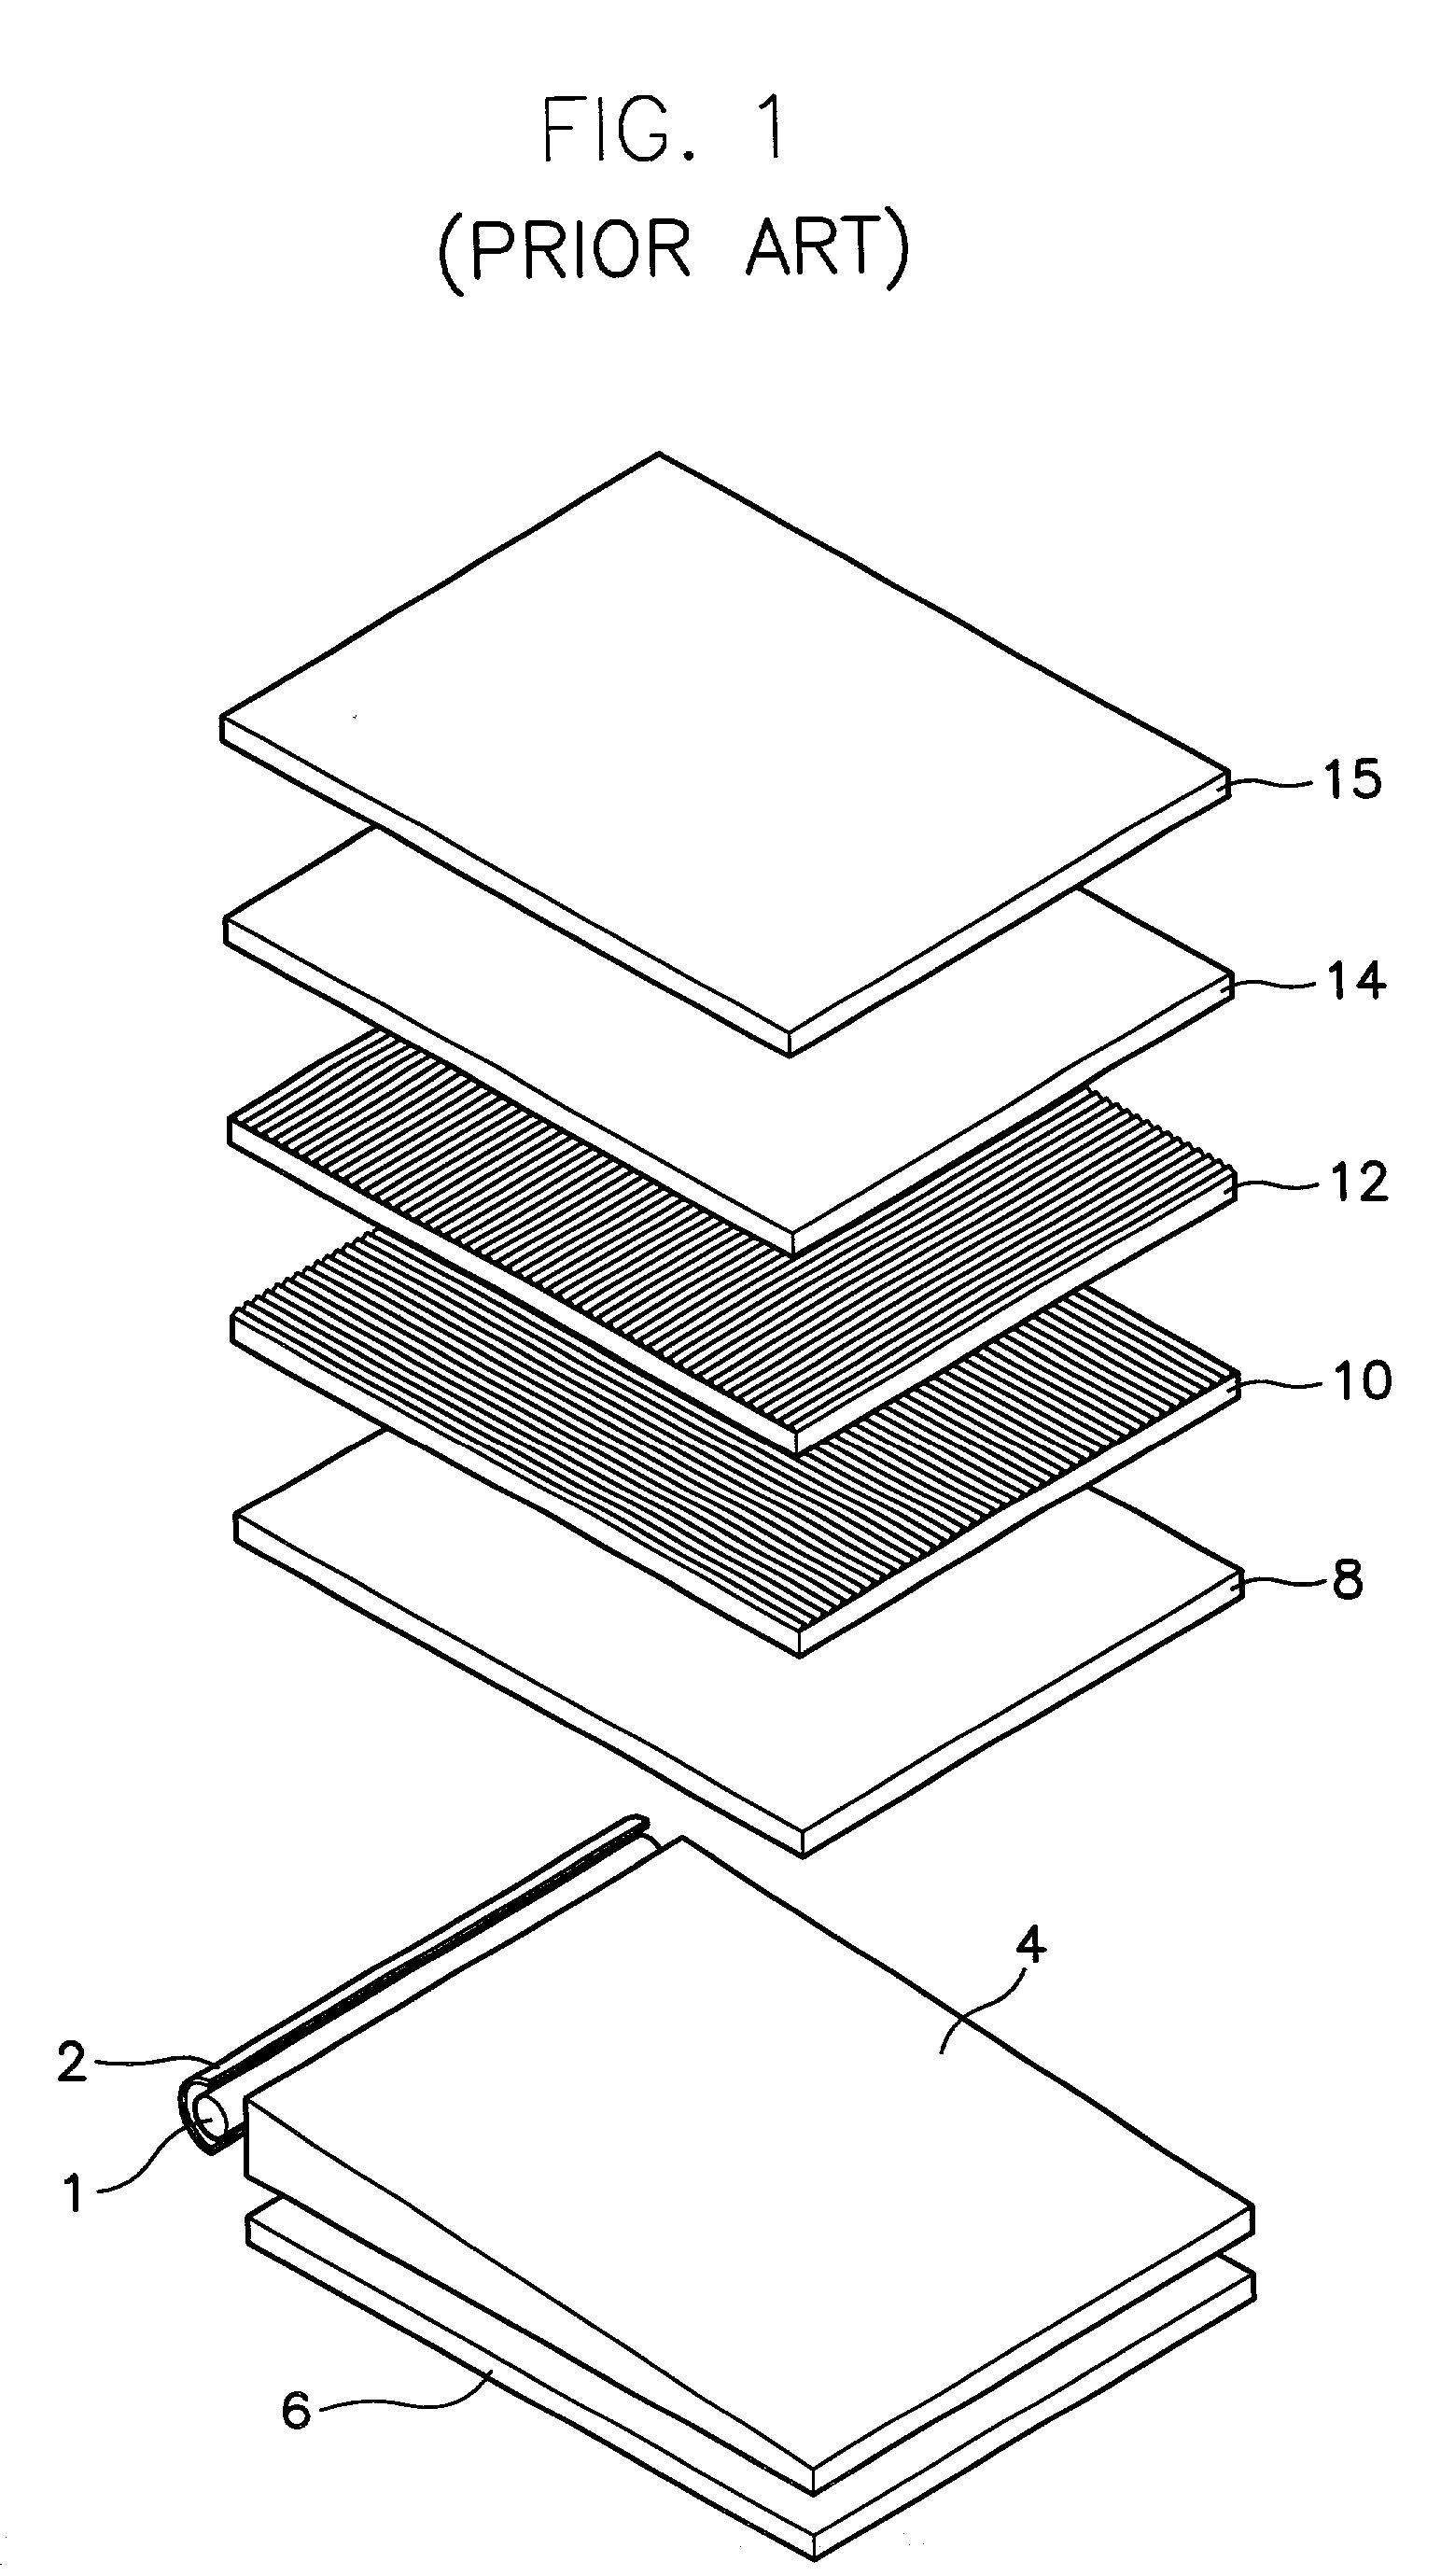 Method for illuminating liquid crystal display device, a back-light assembly for performing the same, and a liquid crystal display device using the same